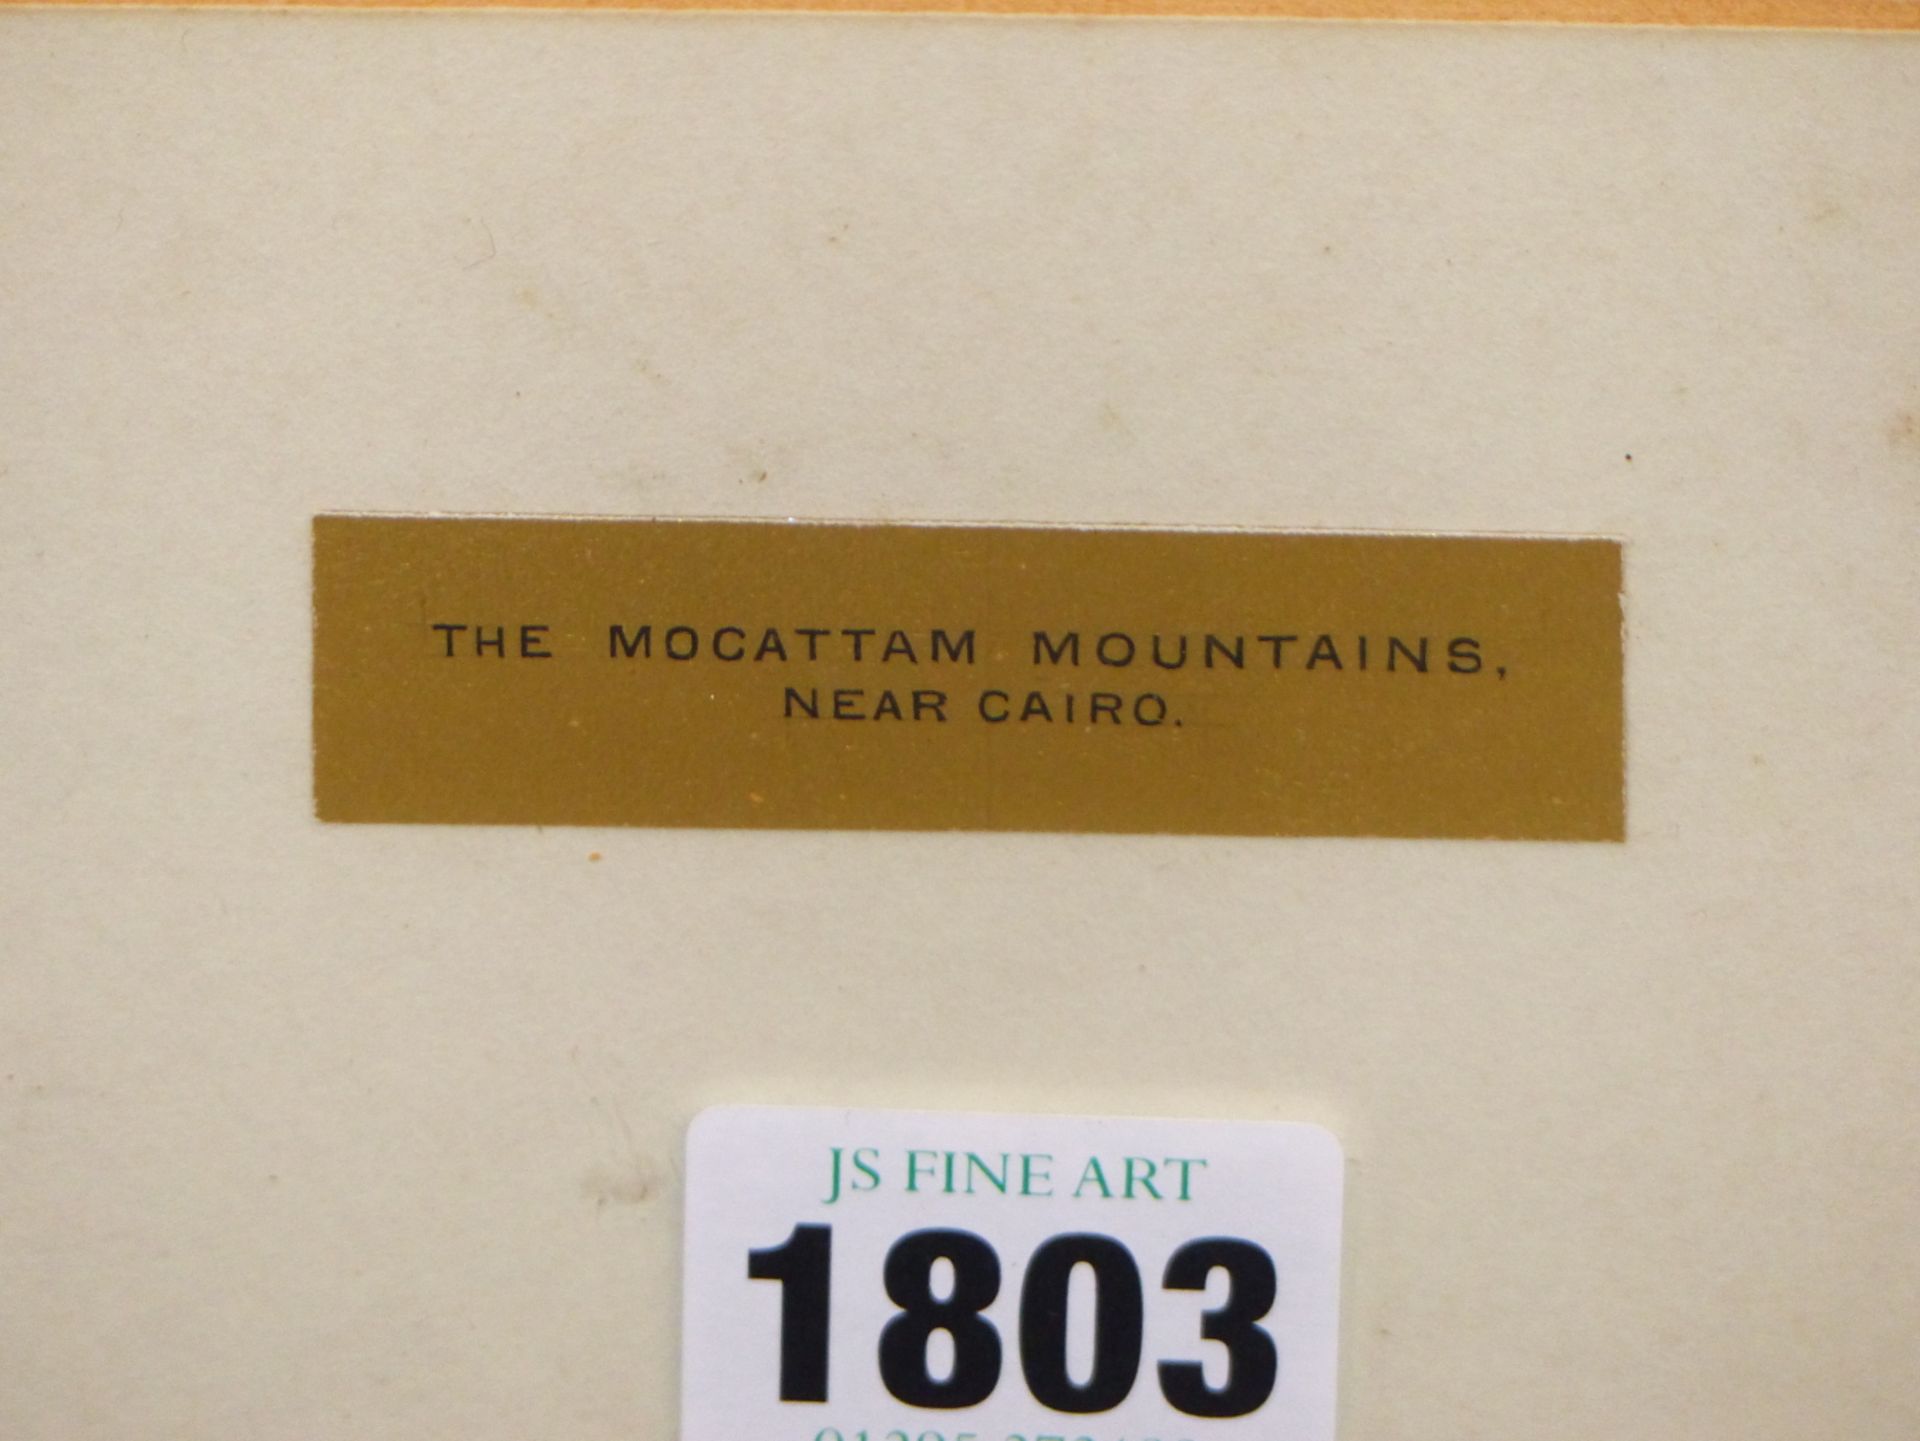 HENRY PILLEAU (1813-1899), THE MOCATTAM MOUNTAINS NEAR CAIRO, EGYPT, SIGNED WITH MONOGRAM, - Image 3 of 6